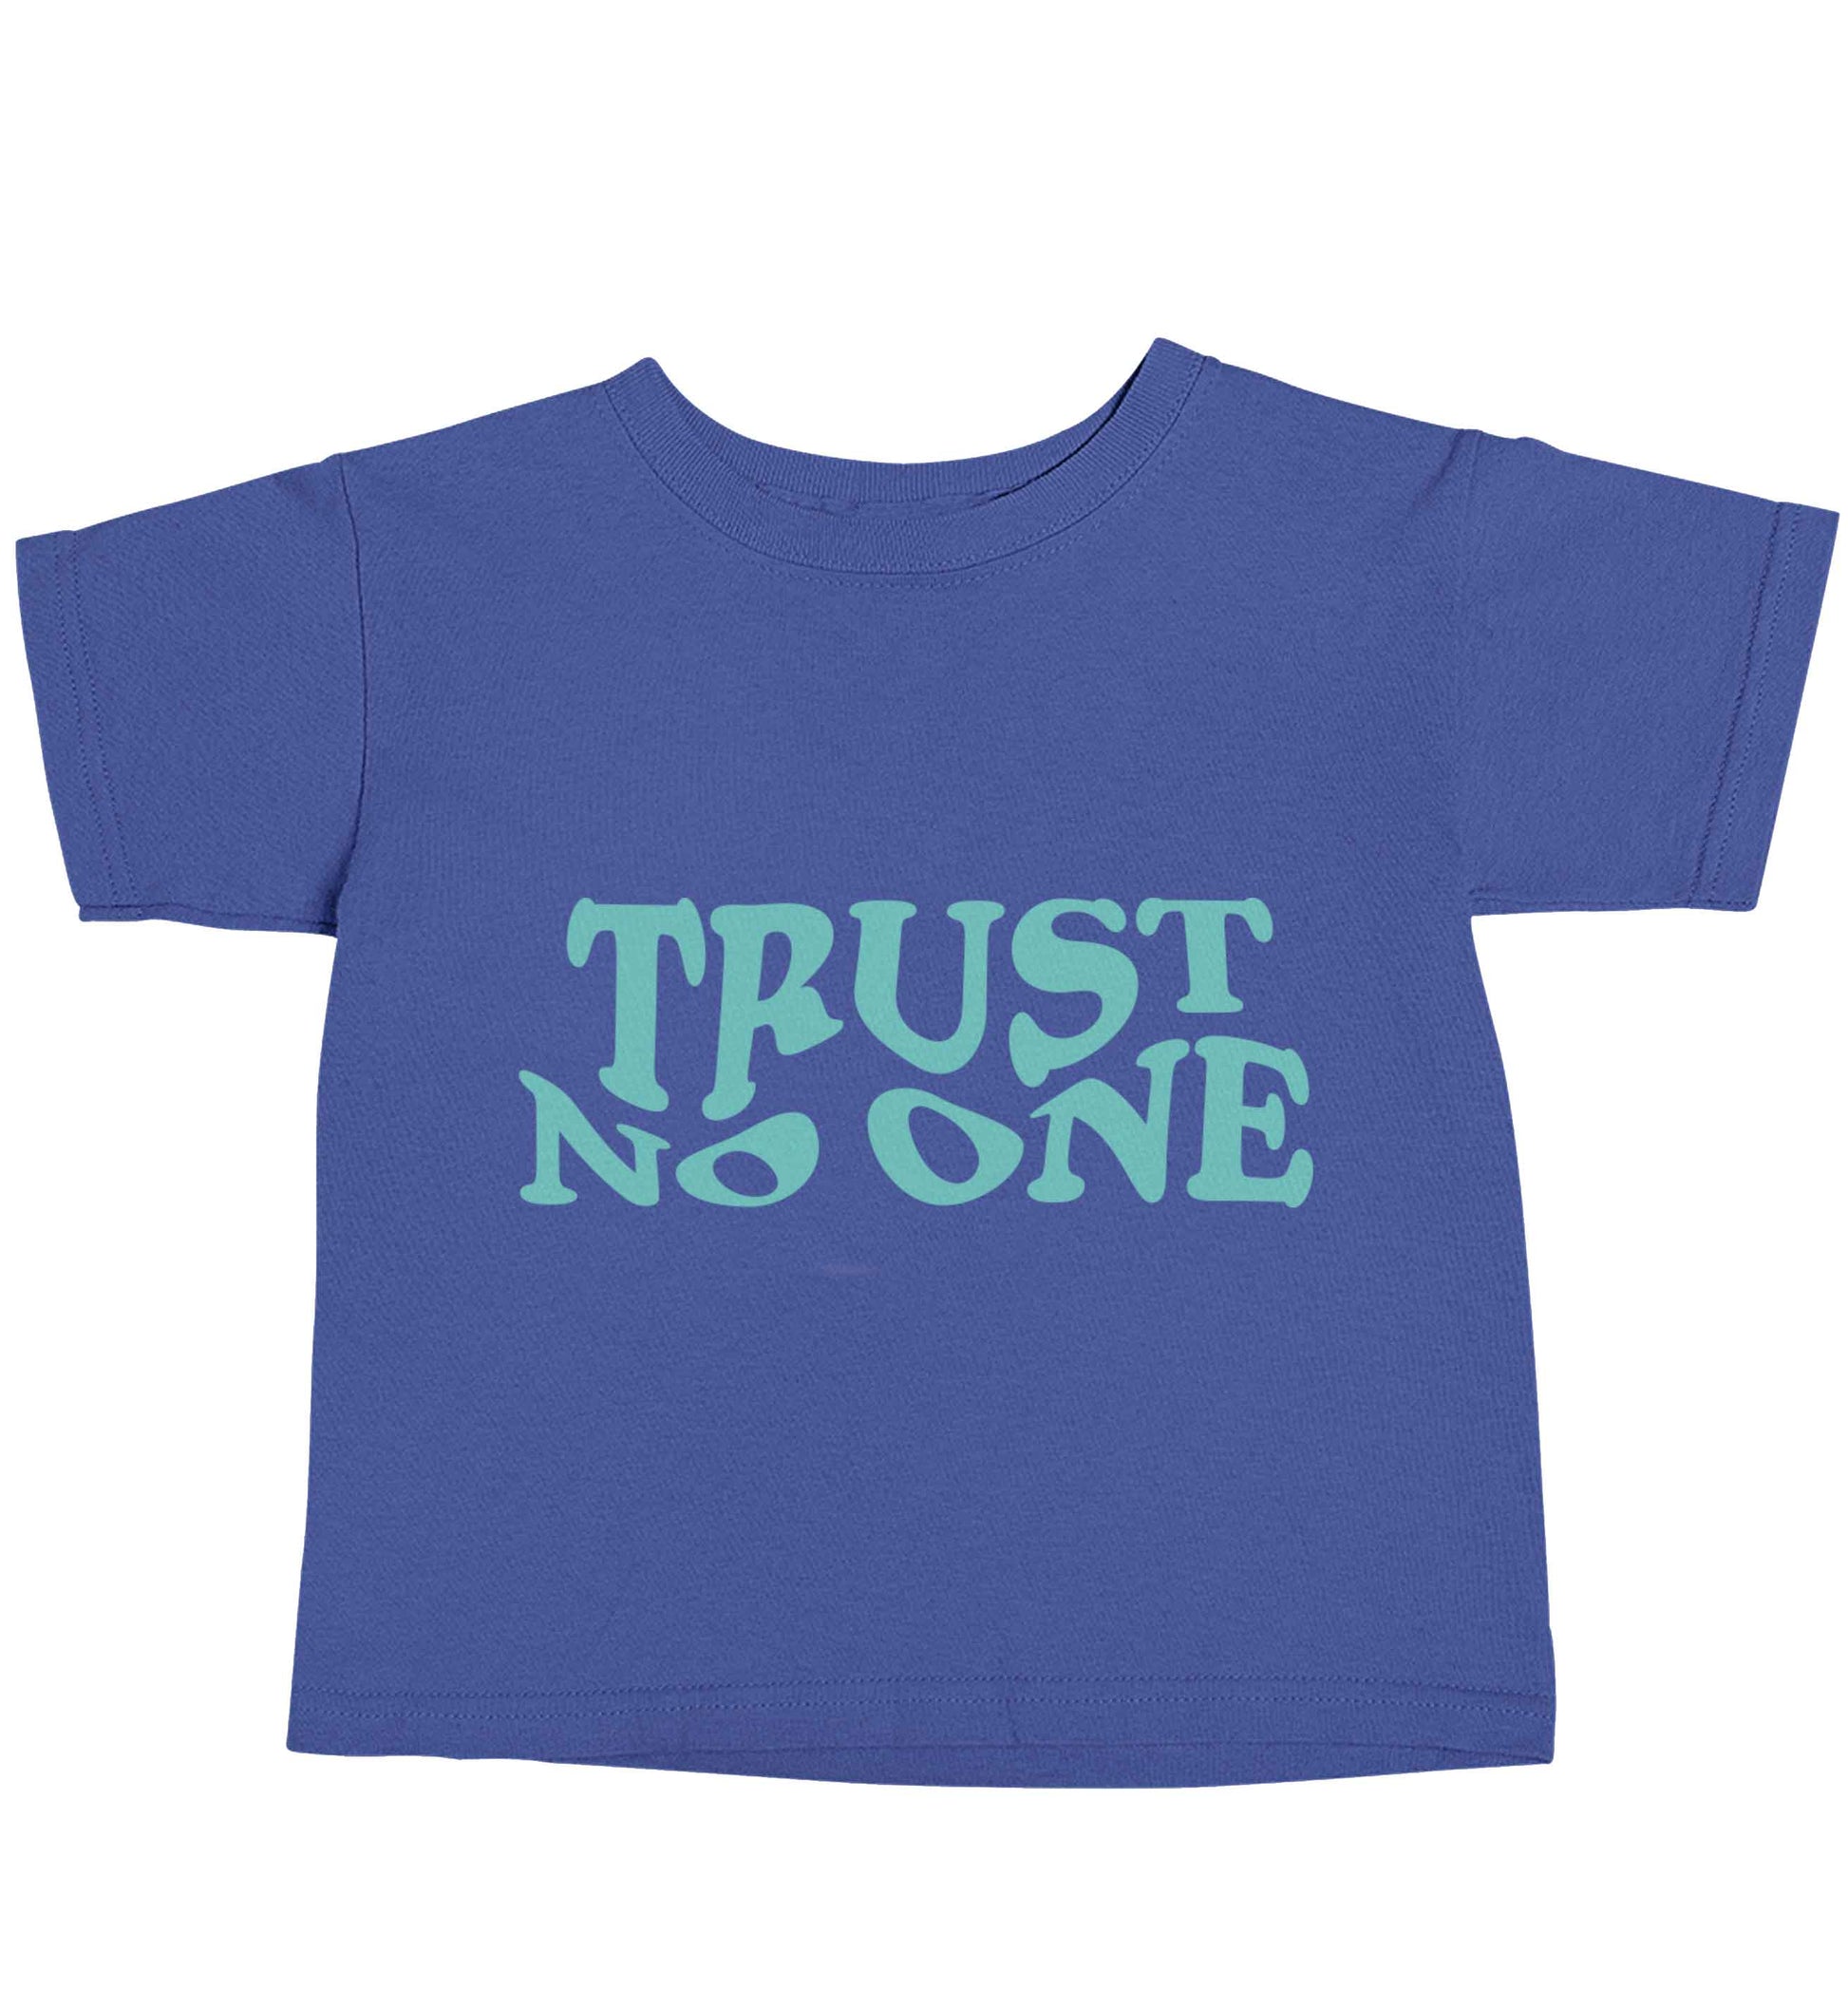 Trust no one blue baby toddler Tshirt 2 Years